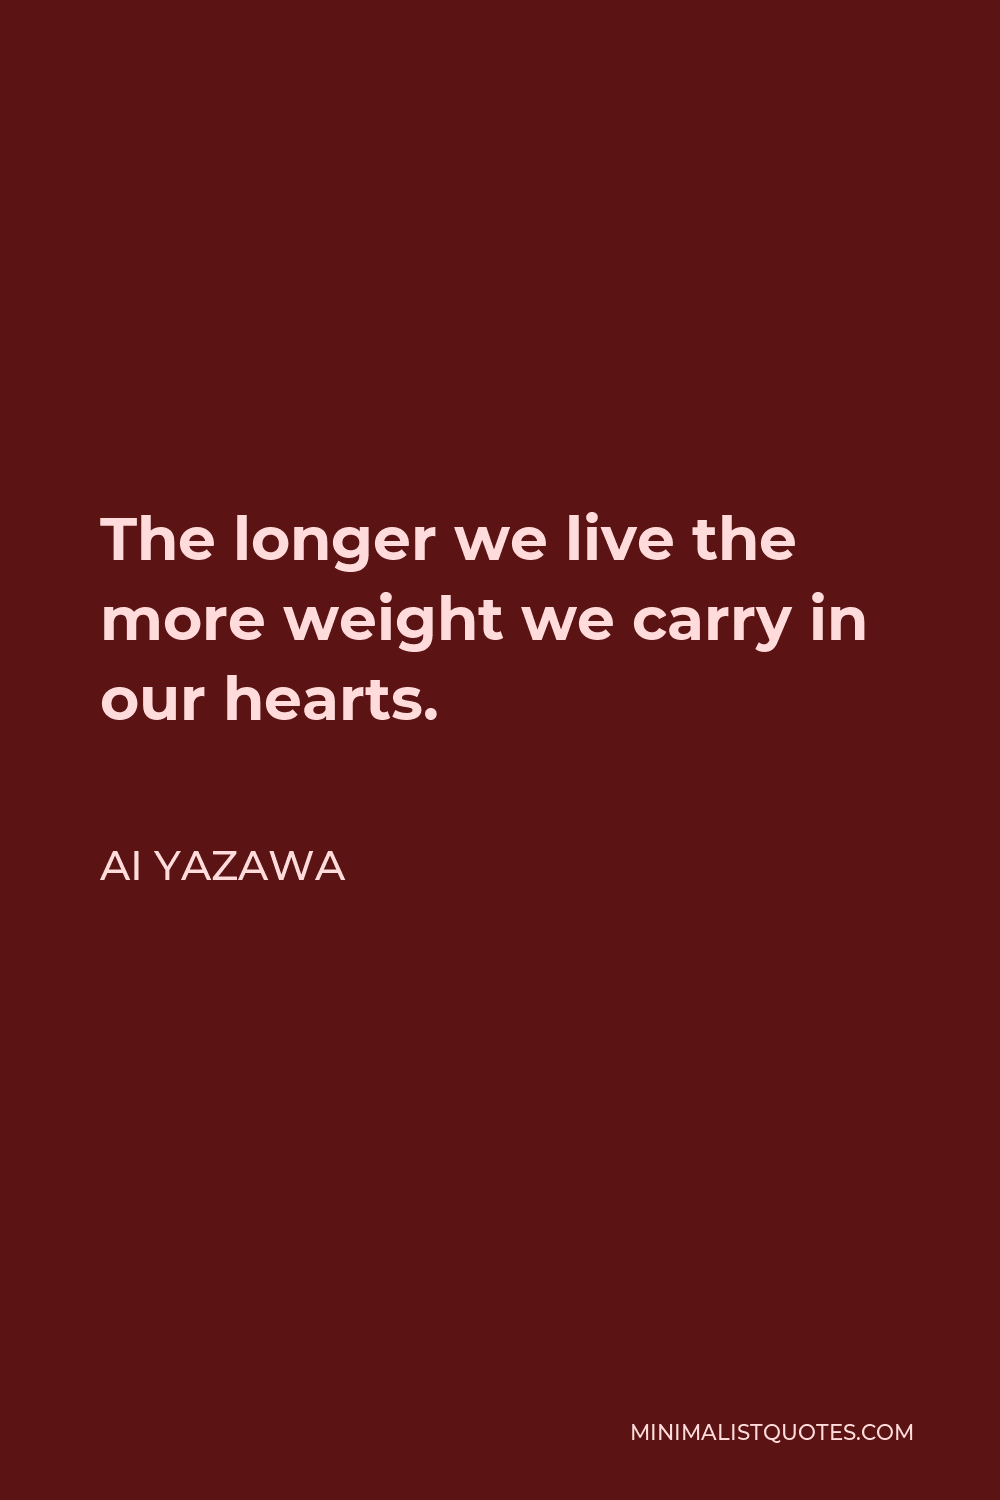 Ai Yazawa Quote - The longer we live the more weight we carry in our hearts.